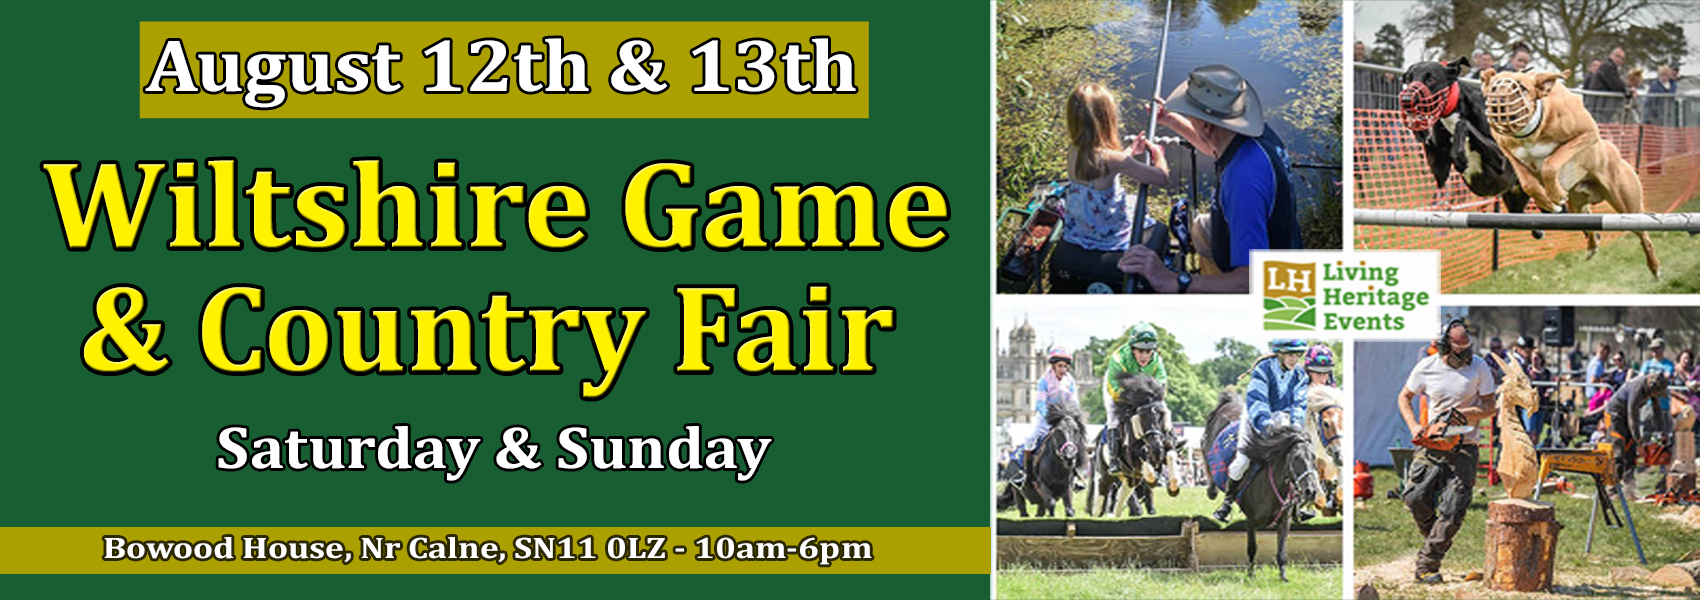 Wiltshire Game and Country Fair